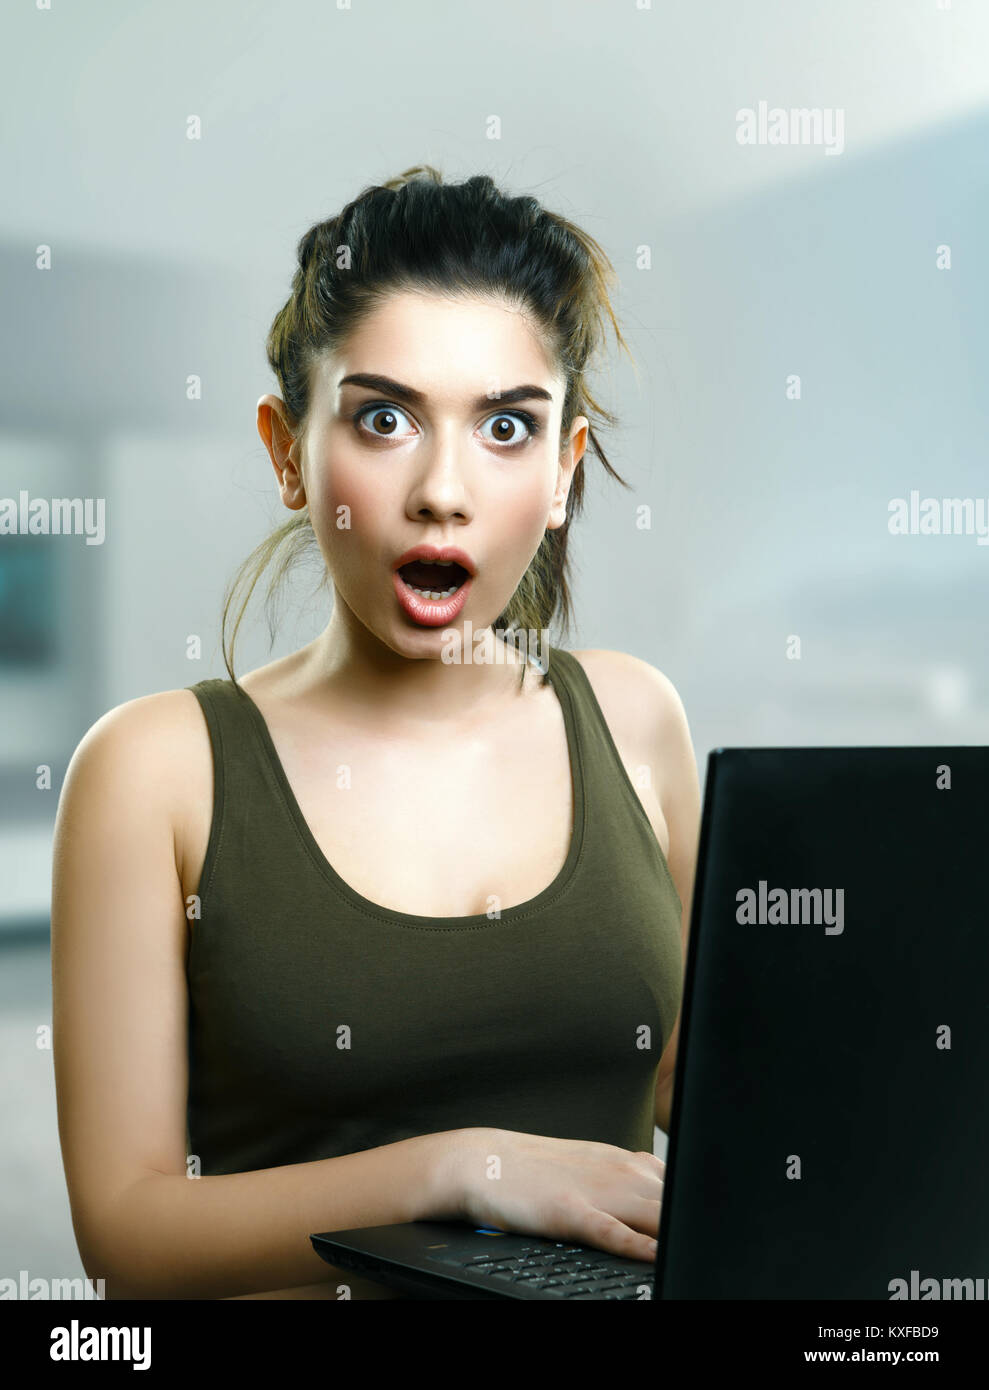 Surprised girl shocked by online laptop media news Stock Photo